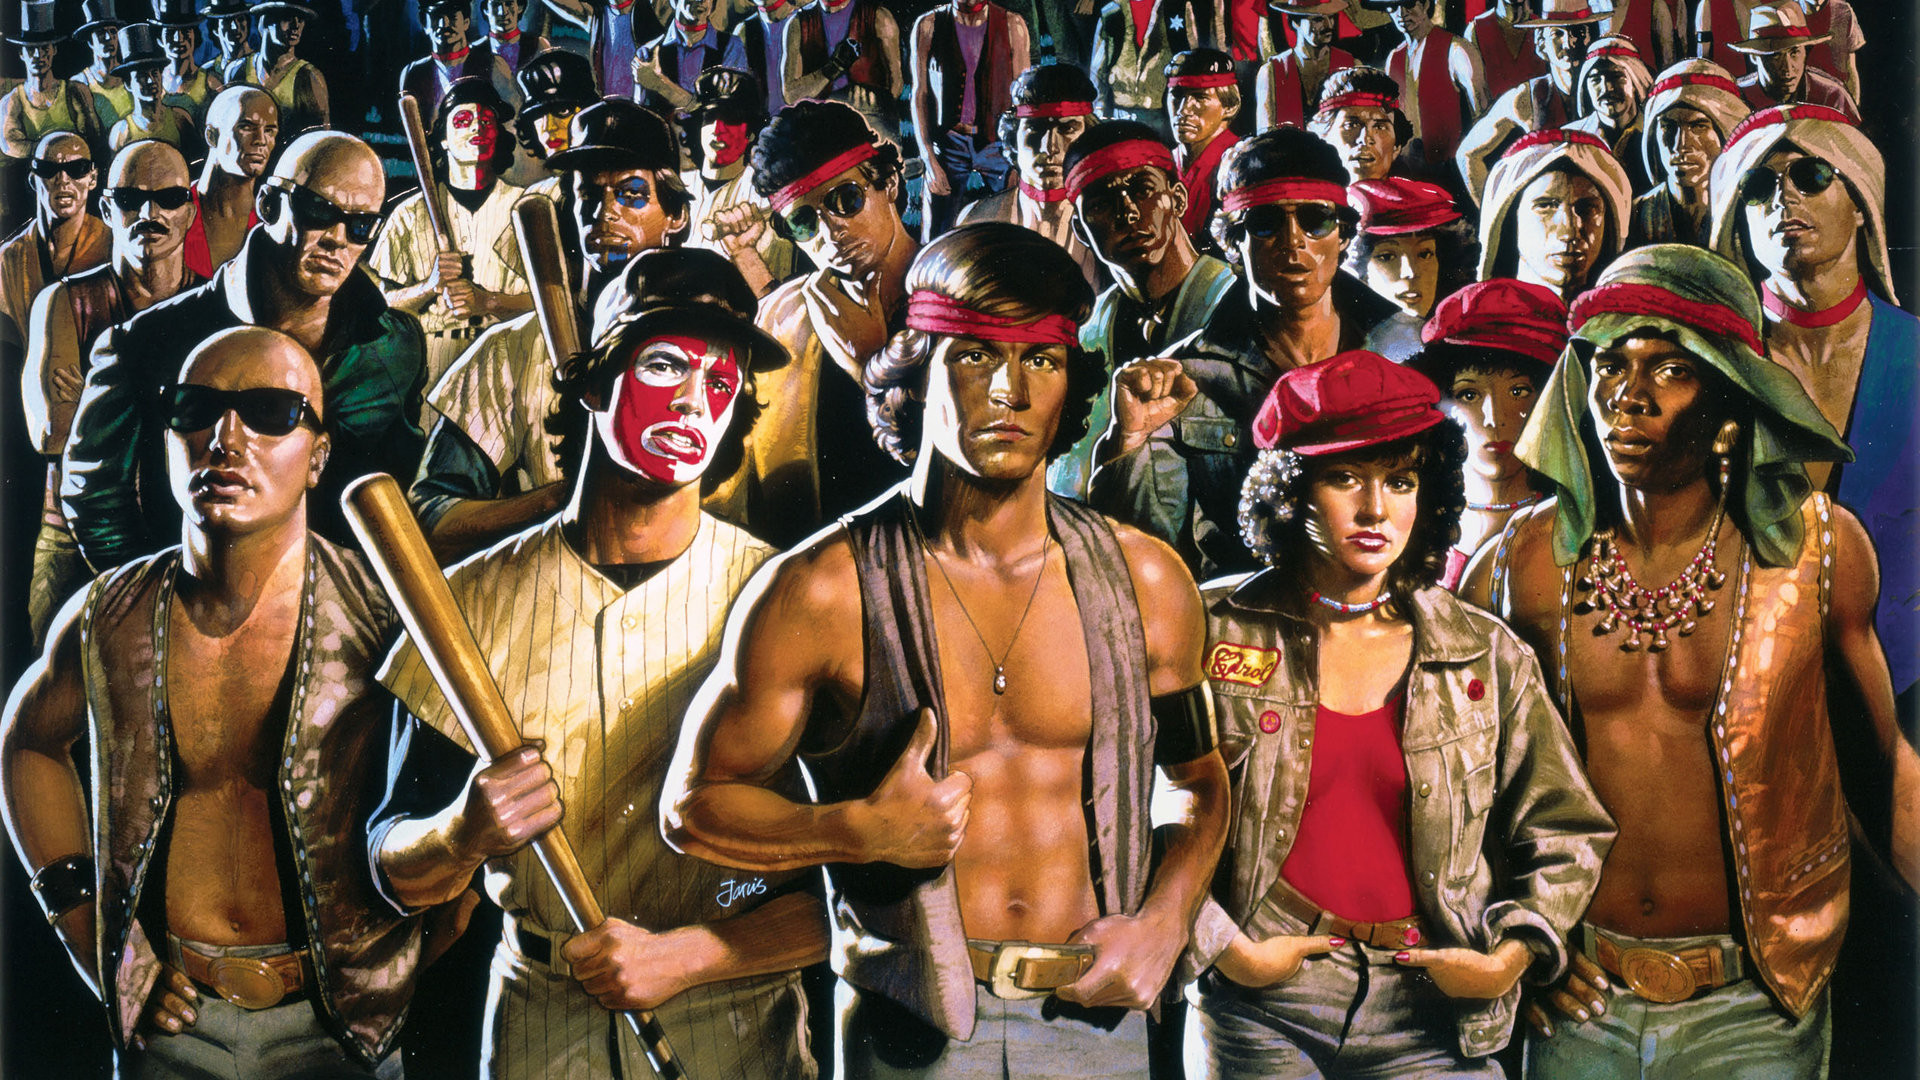 Rockstar’s “The Warriors” Coming to PS4 - It's Time to Come Out and Play... Station 4